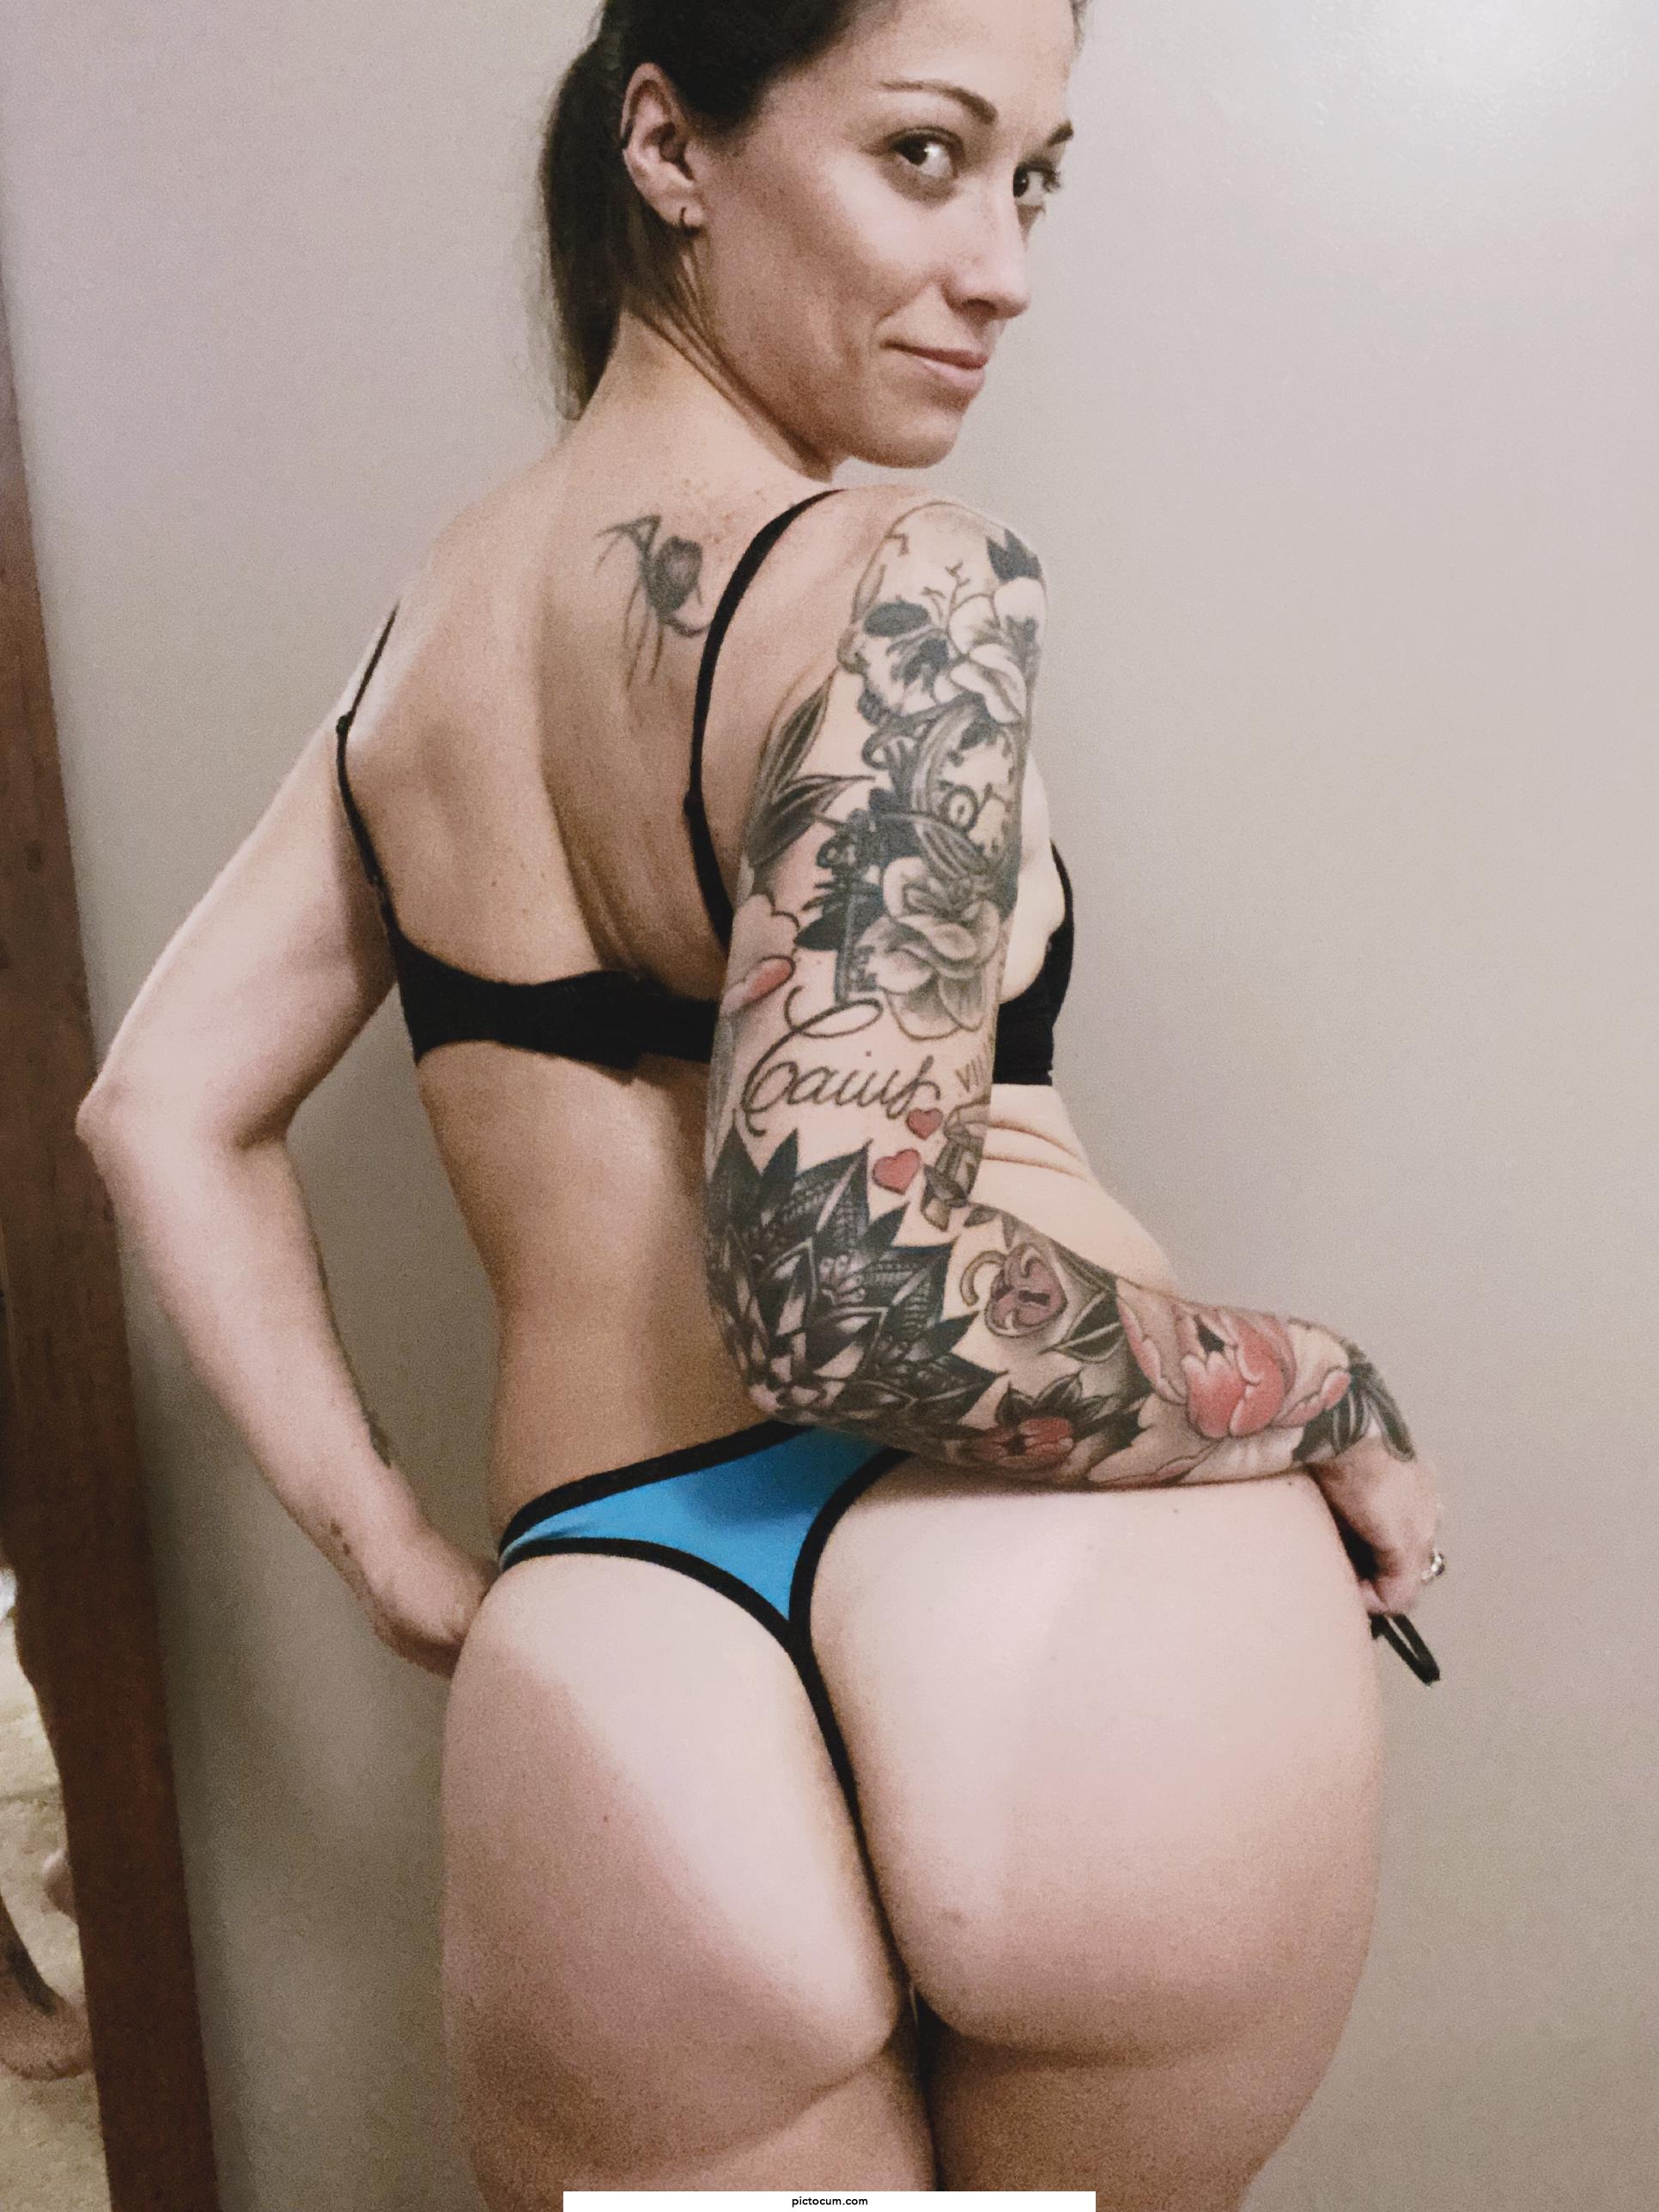 My Tattoos with a rear view